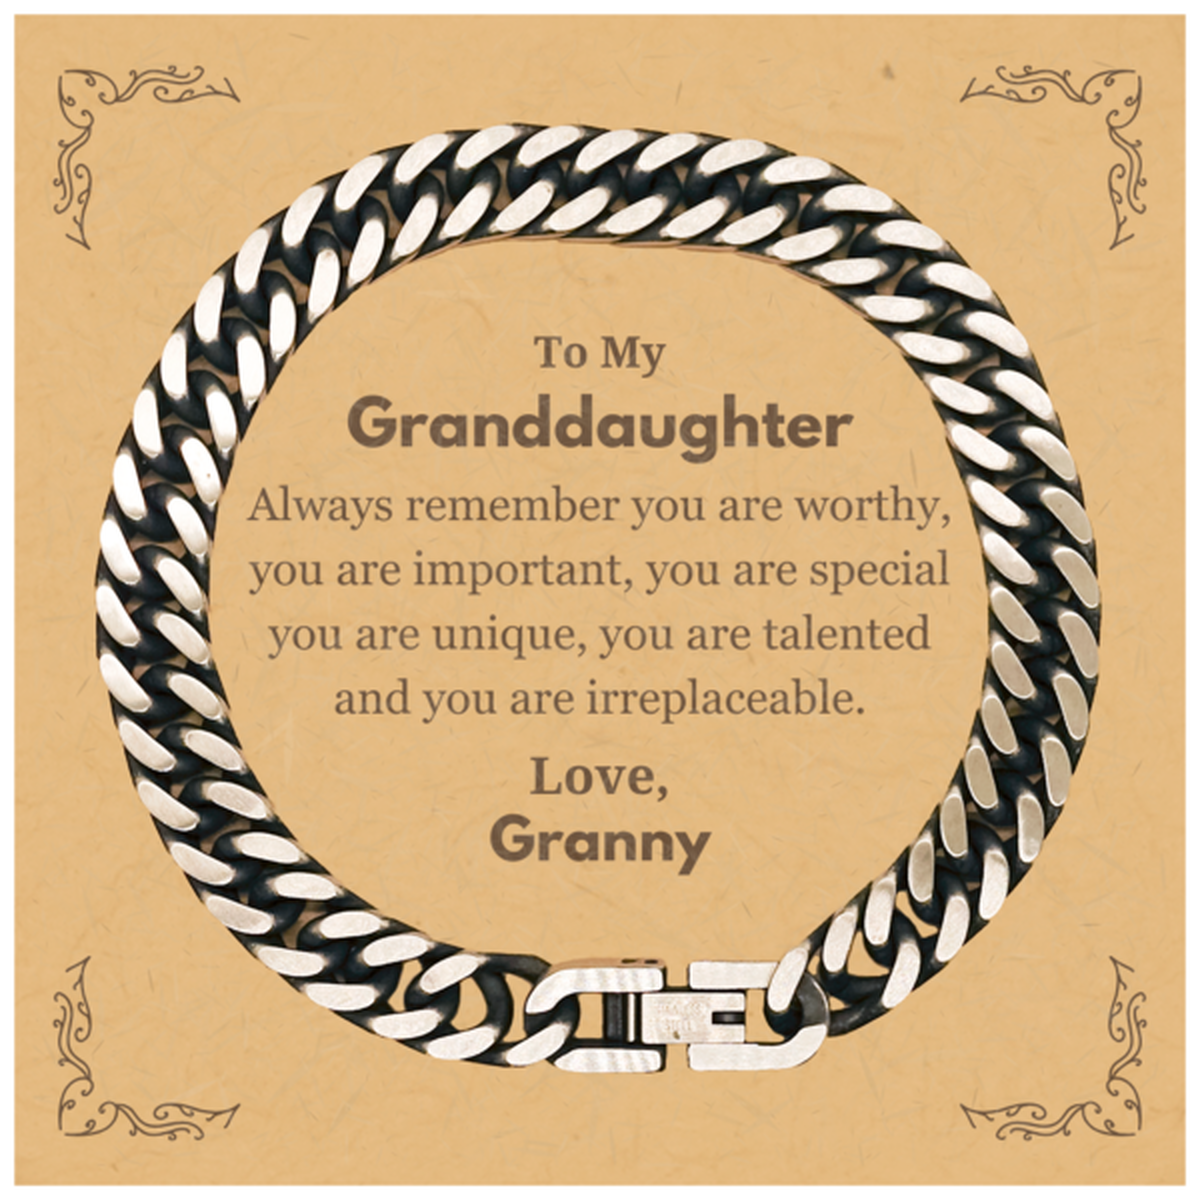 Granddaughter Birthday Gifts from Granny, Inspirational Cuban Link Chain Bracelet for Granddaughter Christmas Graduation Gifts for Granddaughter Always remember you are worthy, you are important. Love, Granny